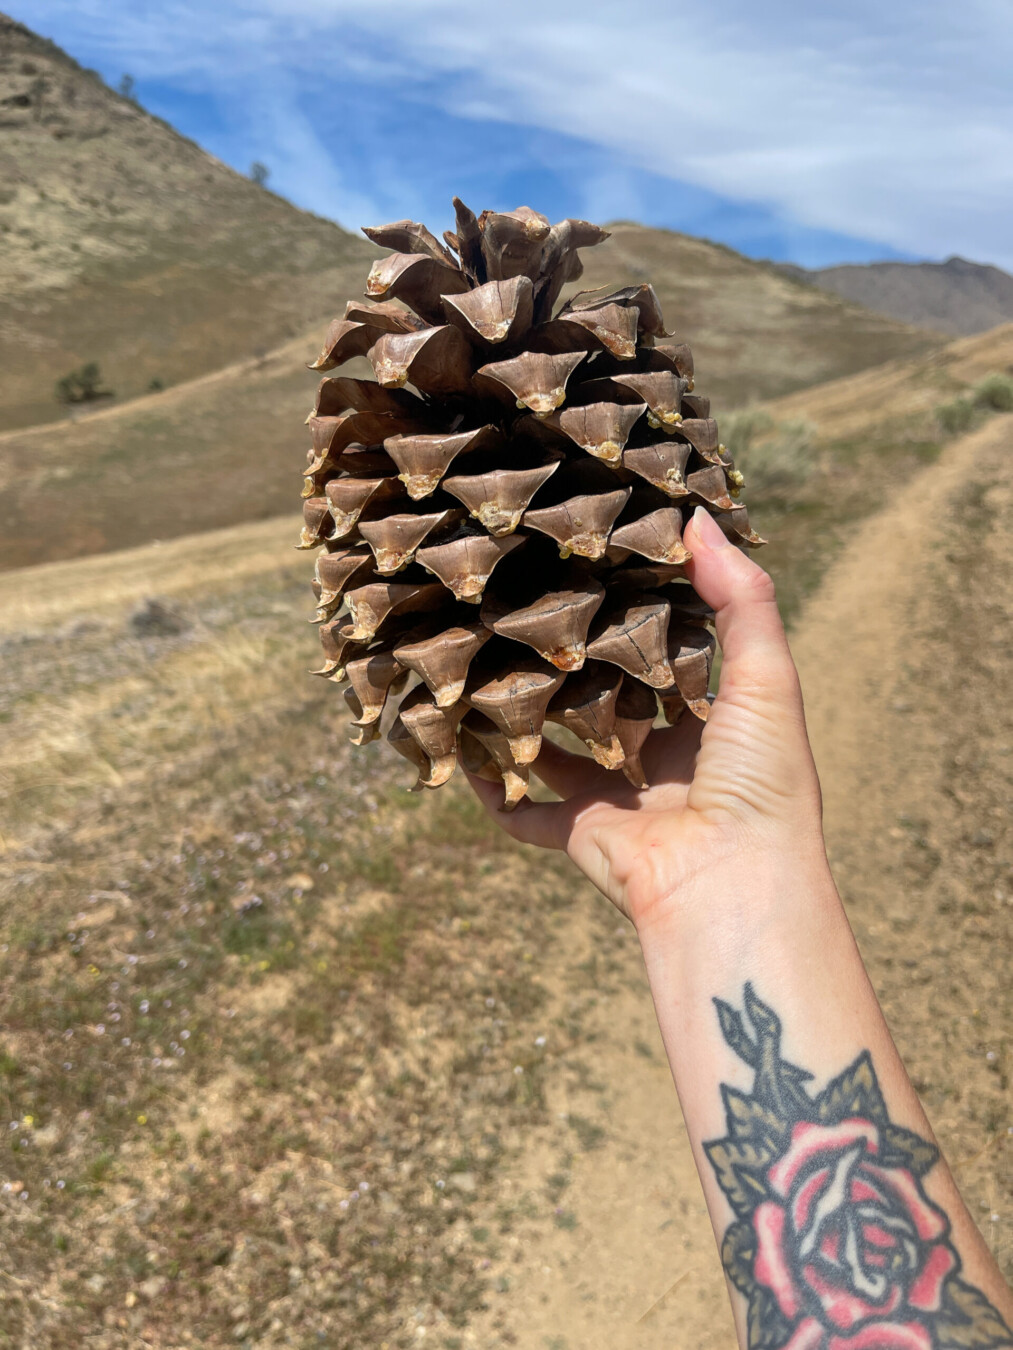 A photo of a huge pine cone being held by someone with a rose tattoo on their arm on the Cannel Meadow Trail in Kernville, California.